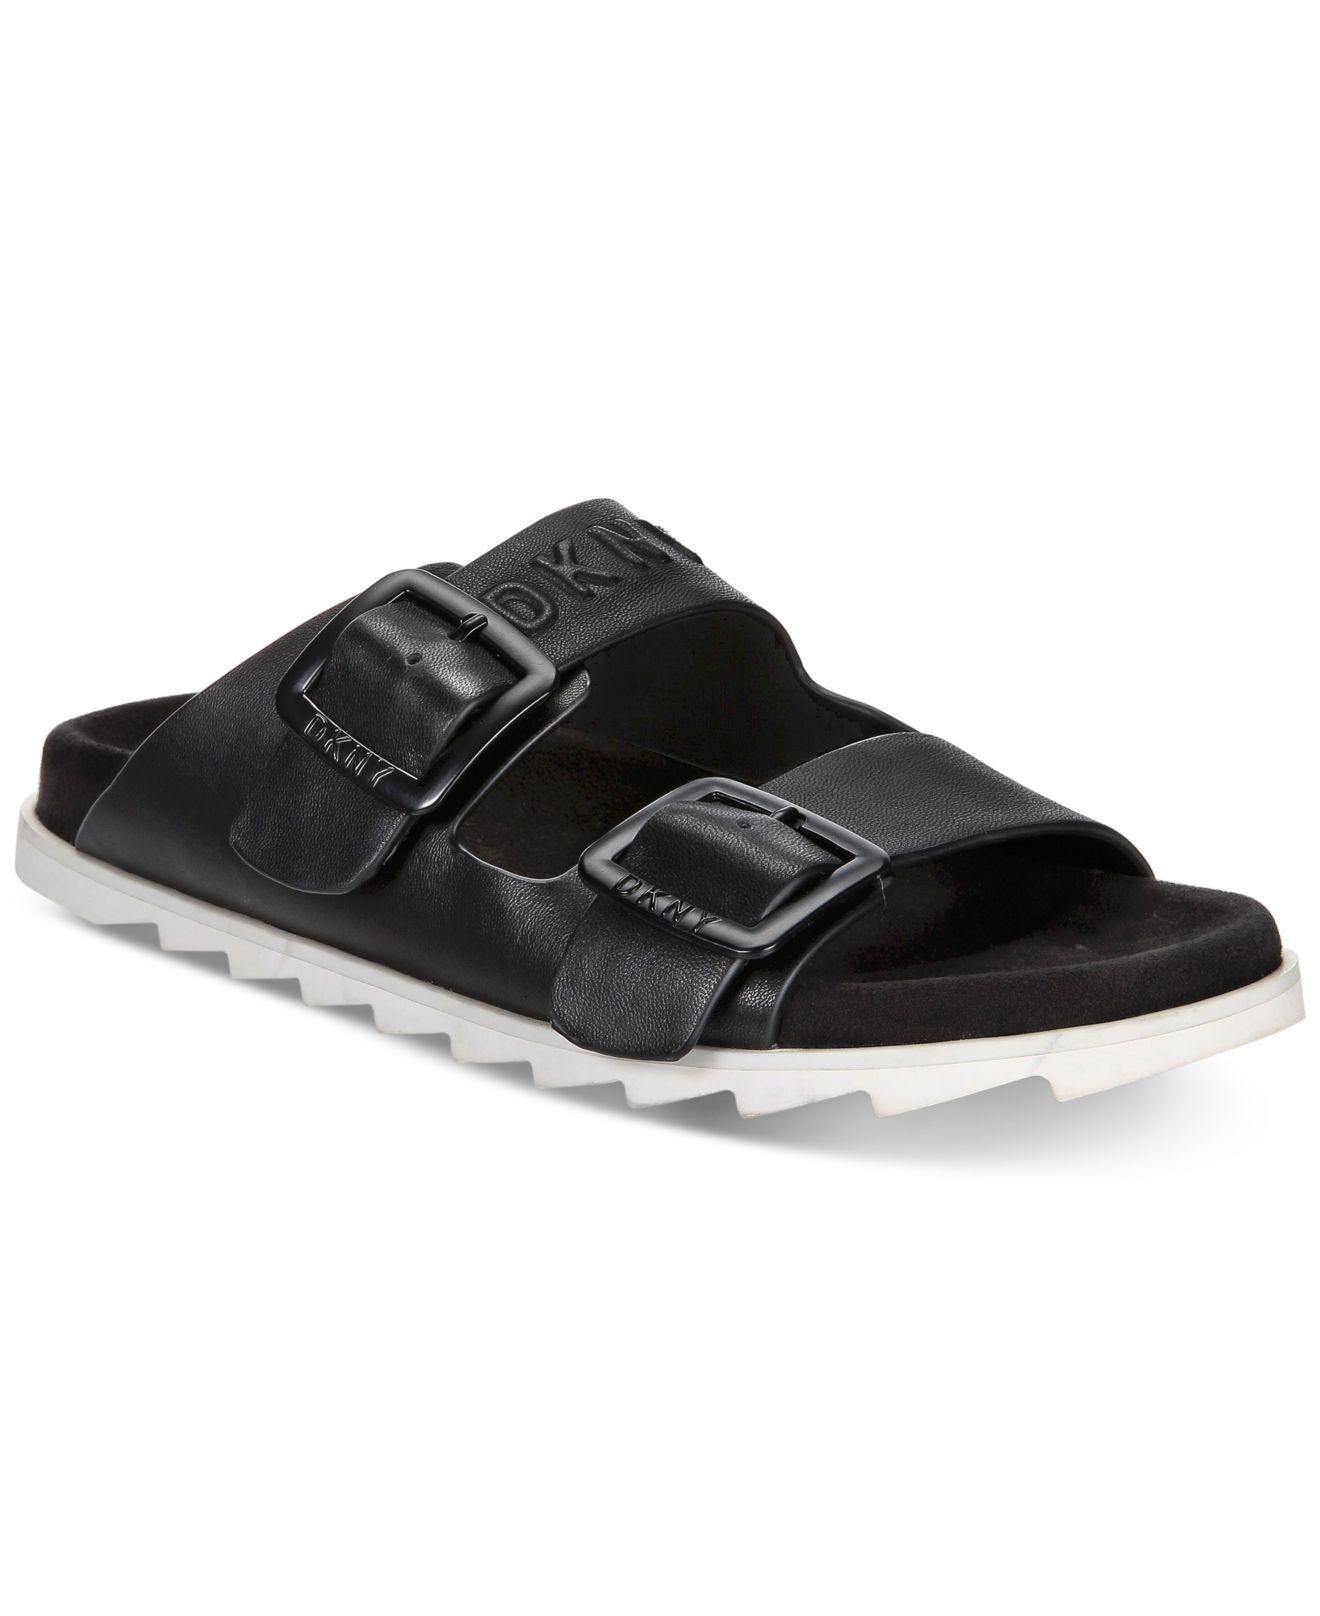 DKNY Leather Maya Flat Sandals, Created For Macy's in Black - Lyst